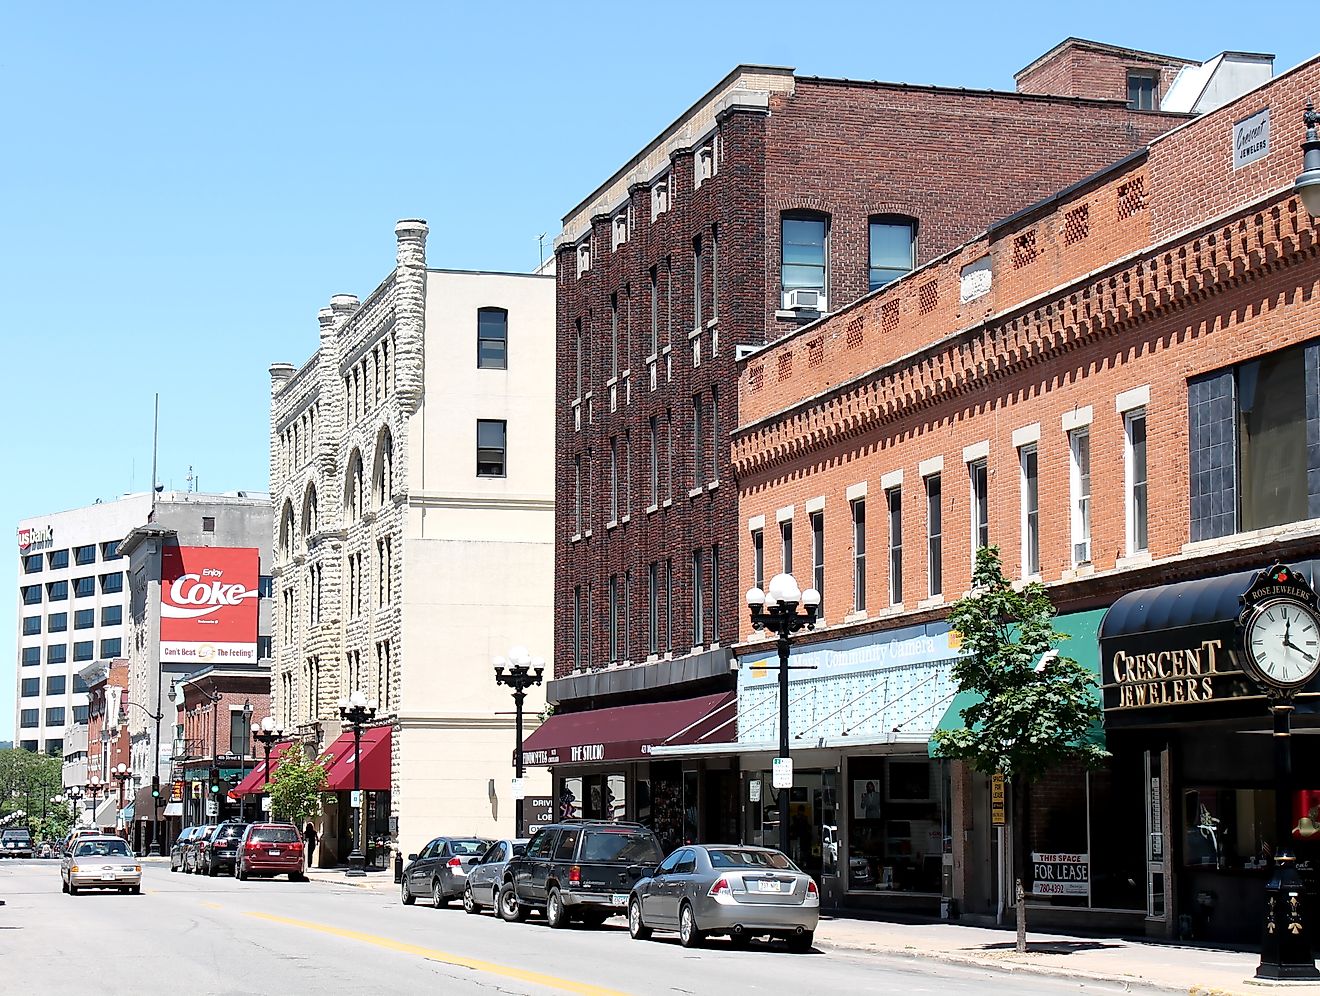 View of the busy downtown area of La Crosse, Wisconsin